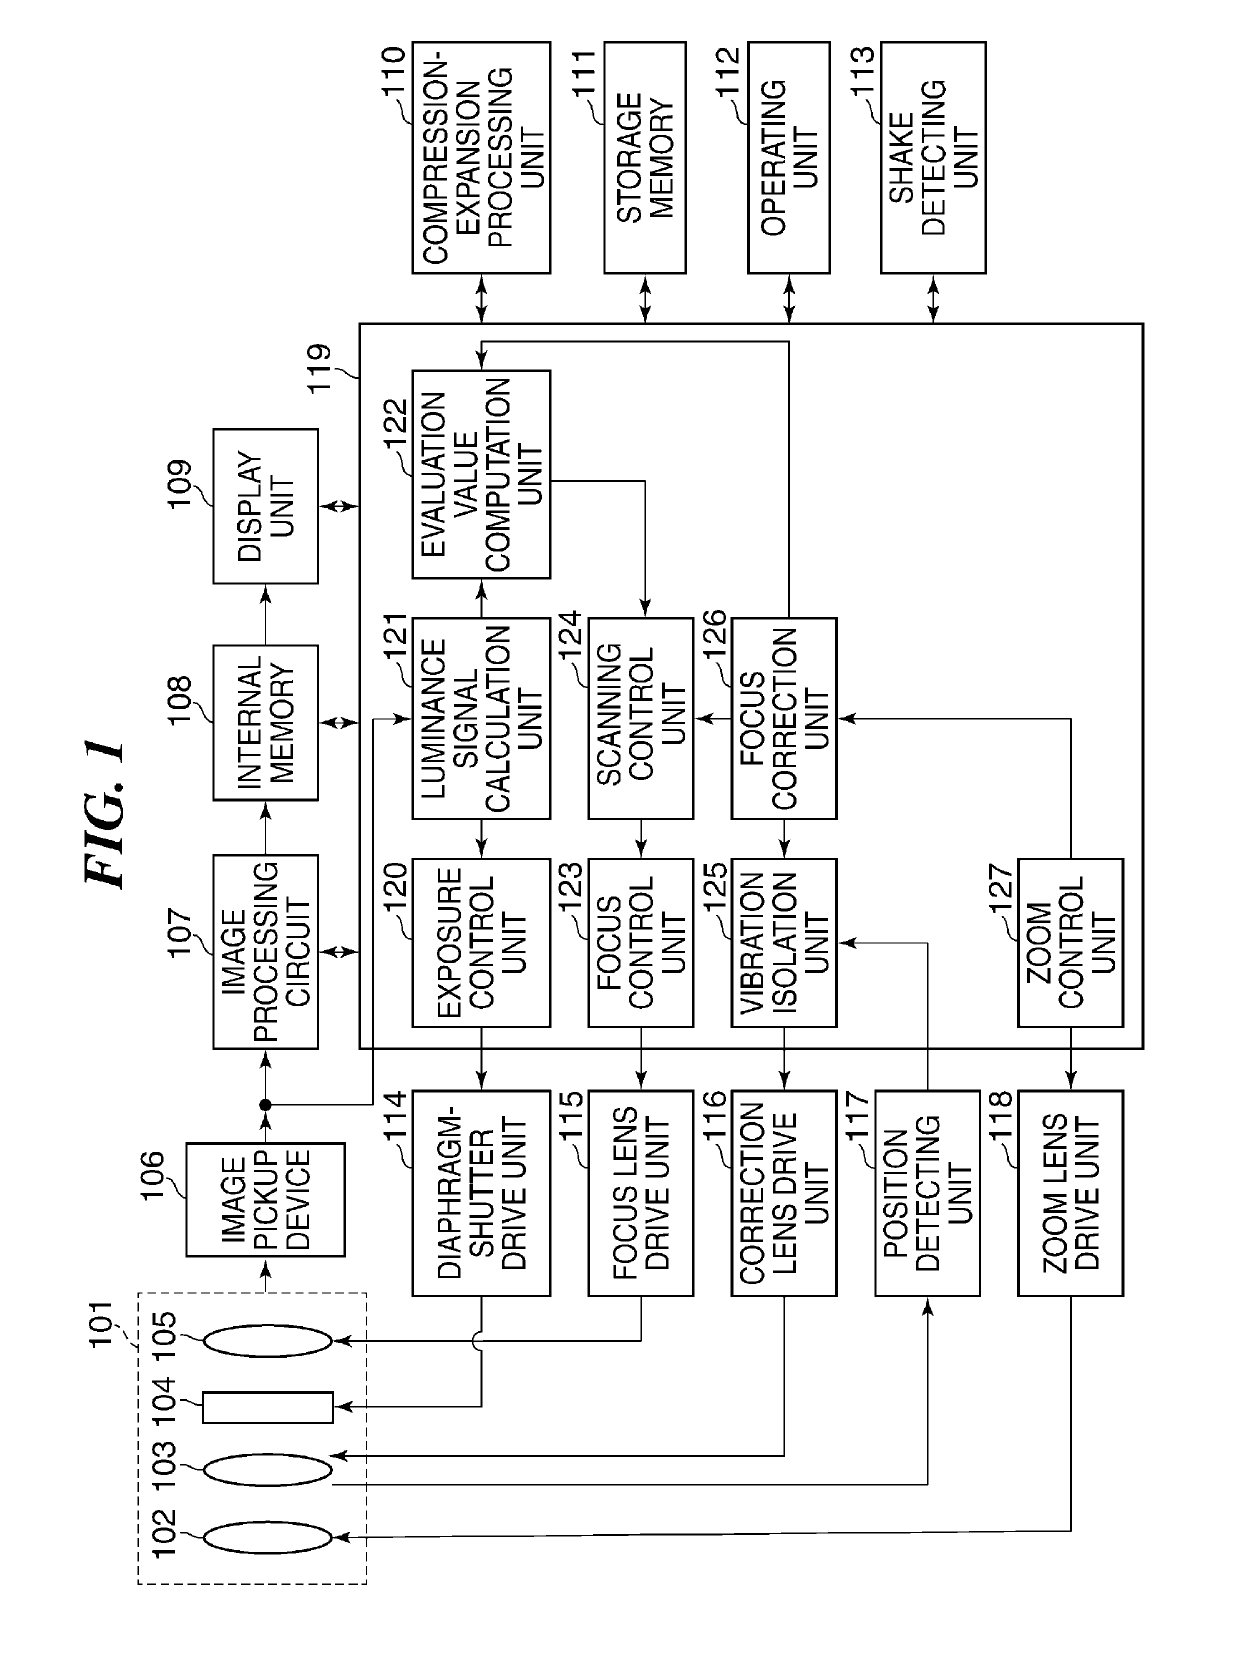 Image pickup apparatus with image stabilizing function, and control method therefor